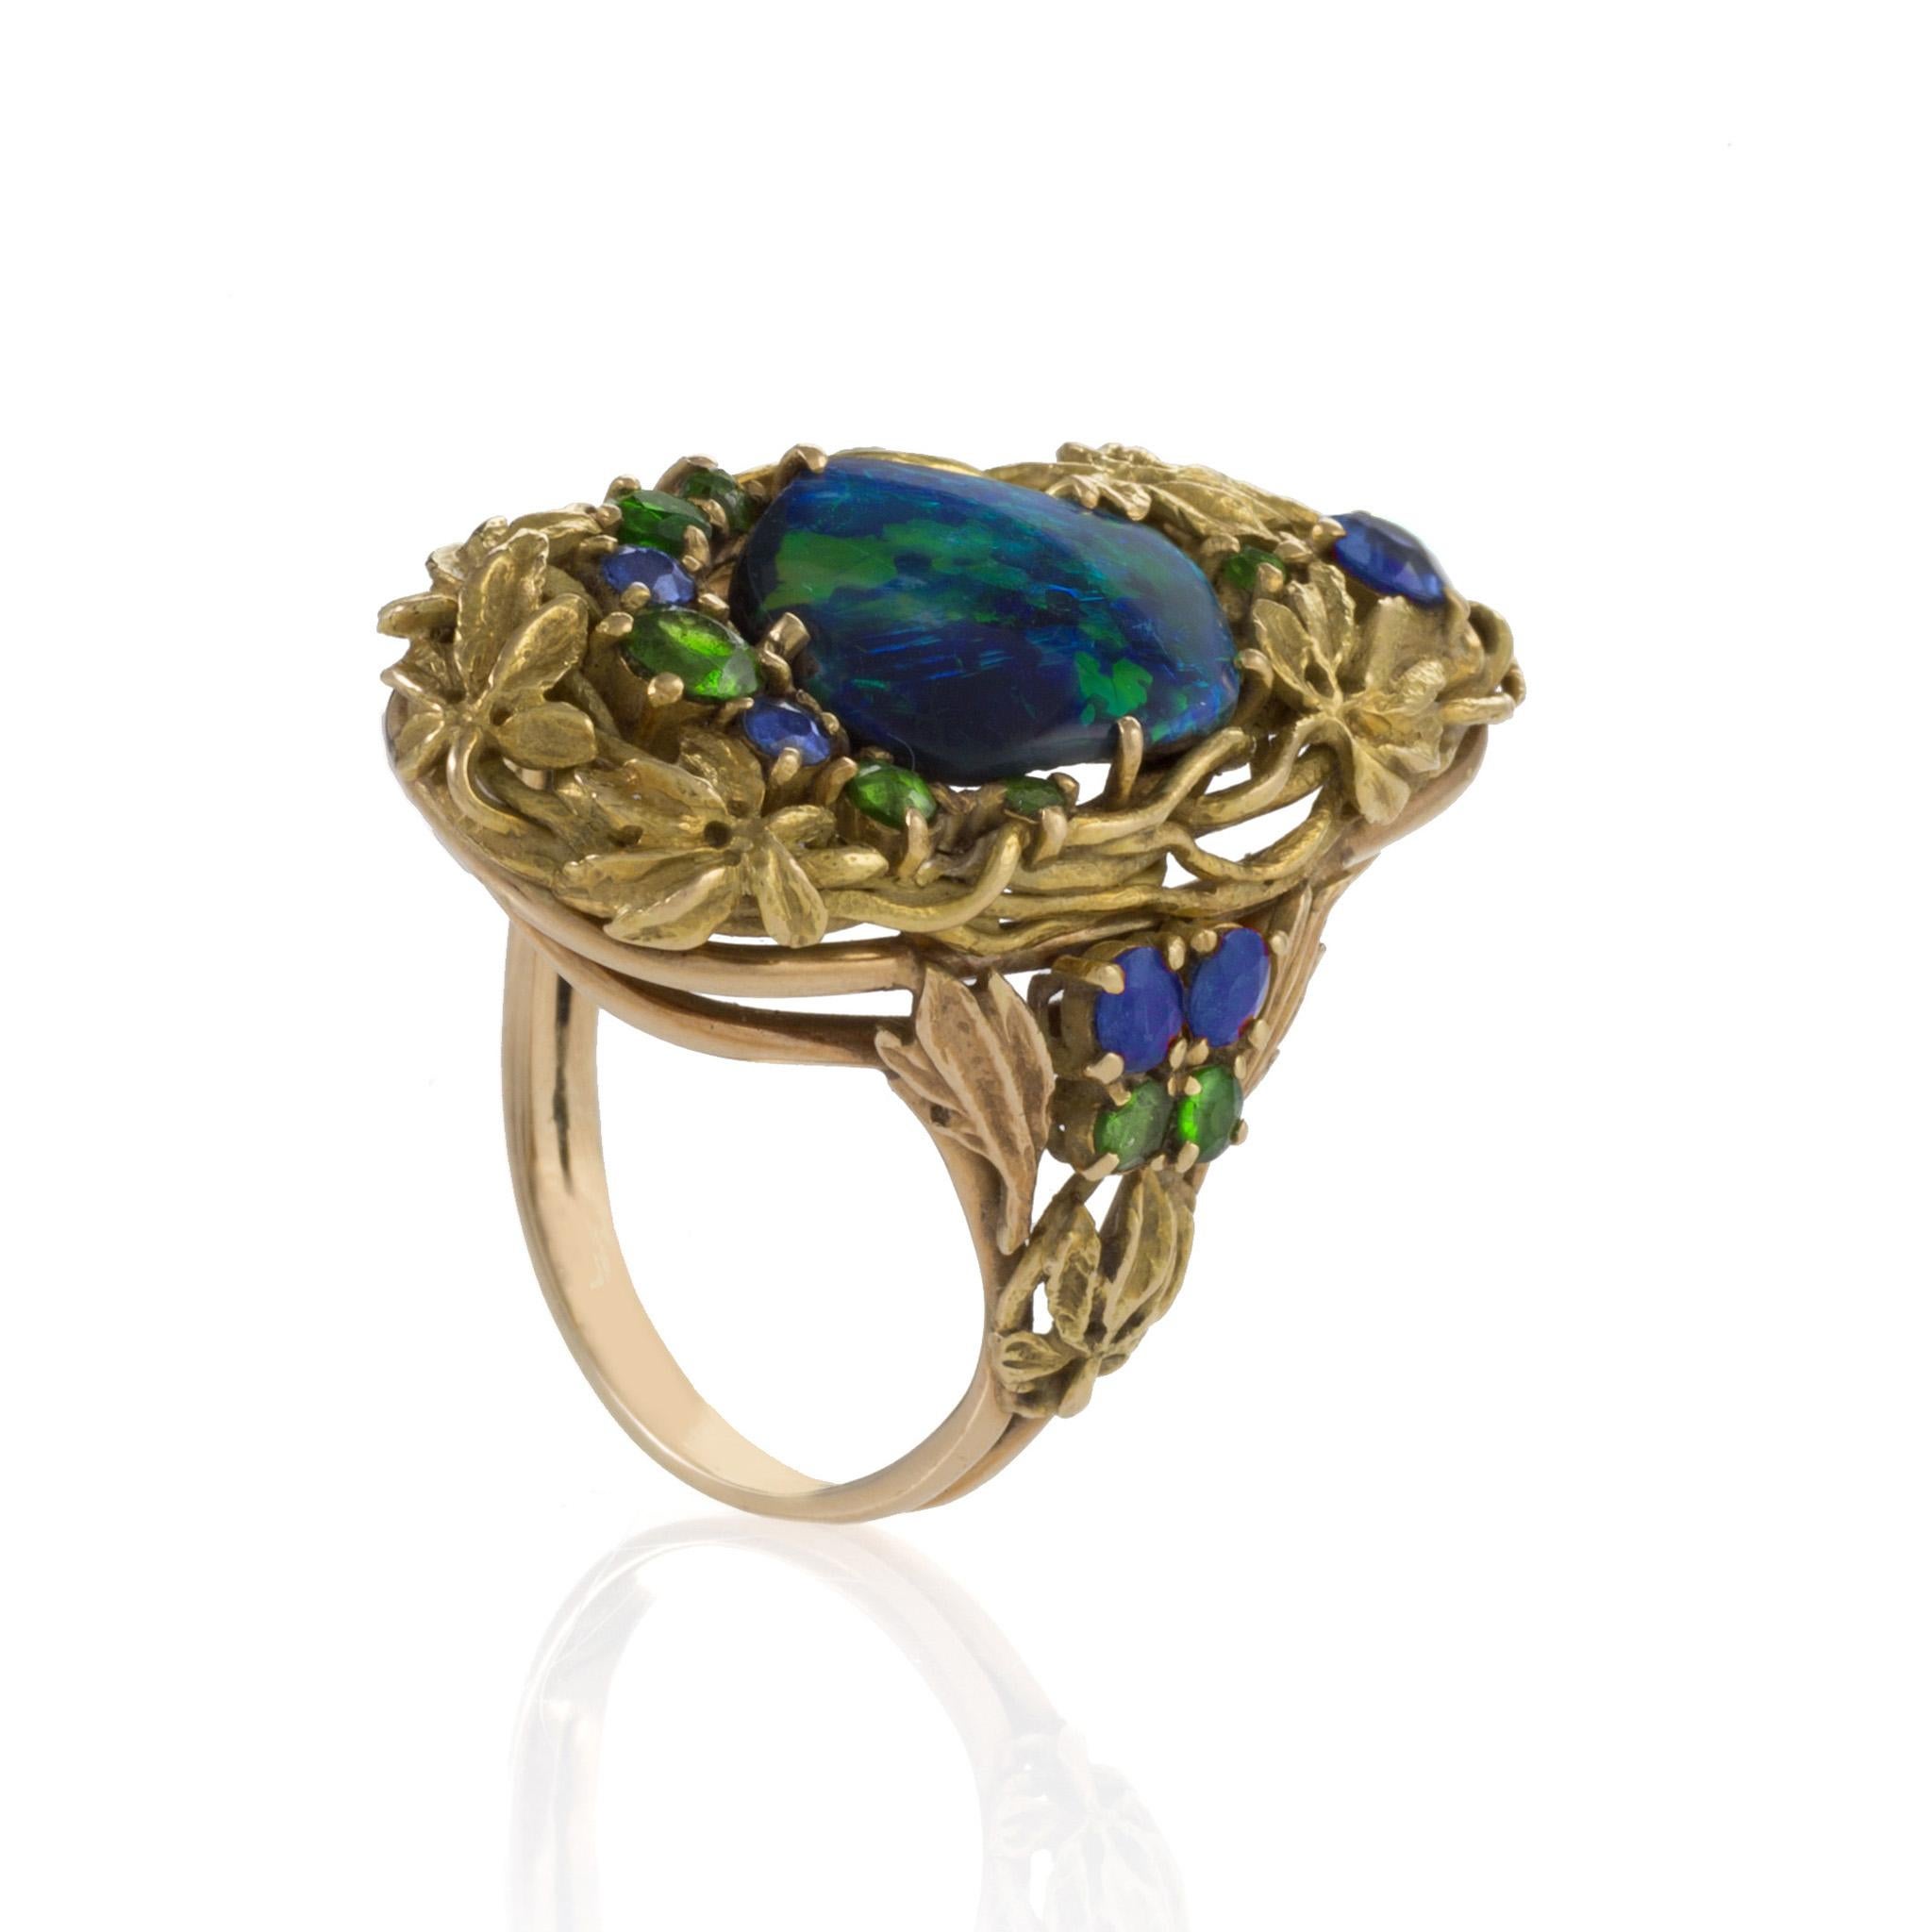 Set with a natural-form black opal, encircled by gold grapevines and conforming leaf and vine motifs, this gorgeous Tiffany & Co. ring by Louis Comfort Tiffany is a miniature ode to nature. The leafy grapevines set with opals was a favored motif in